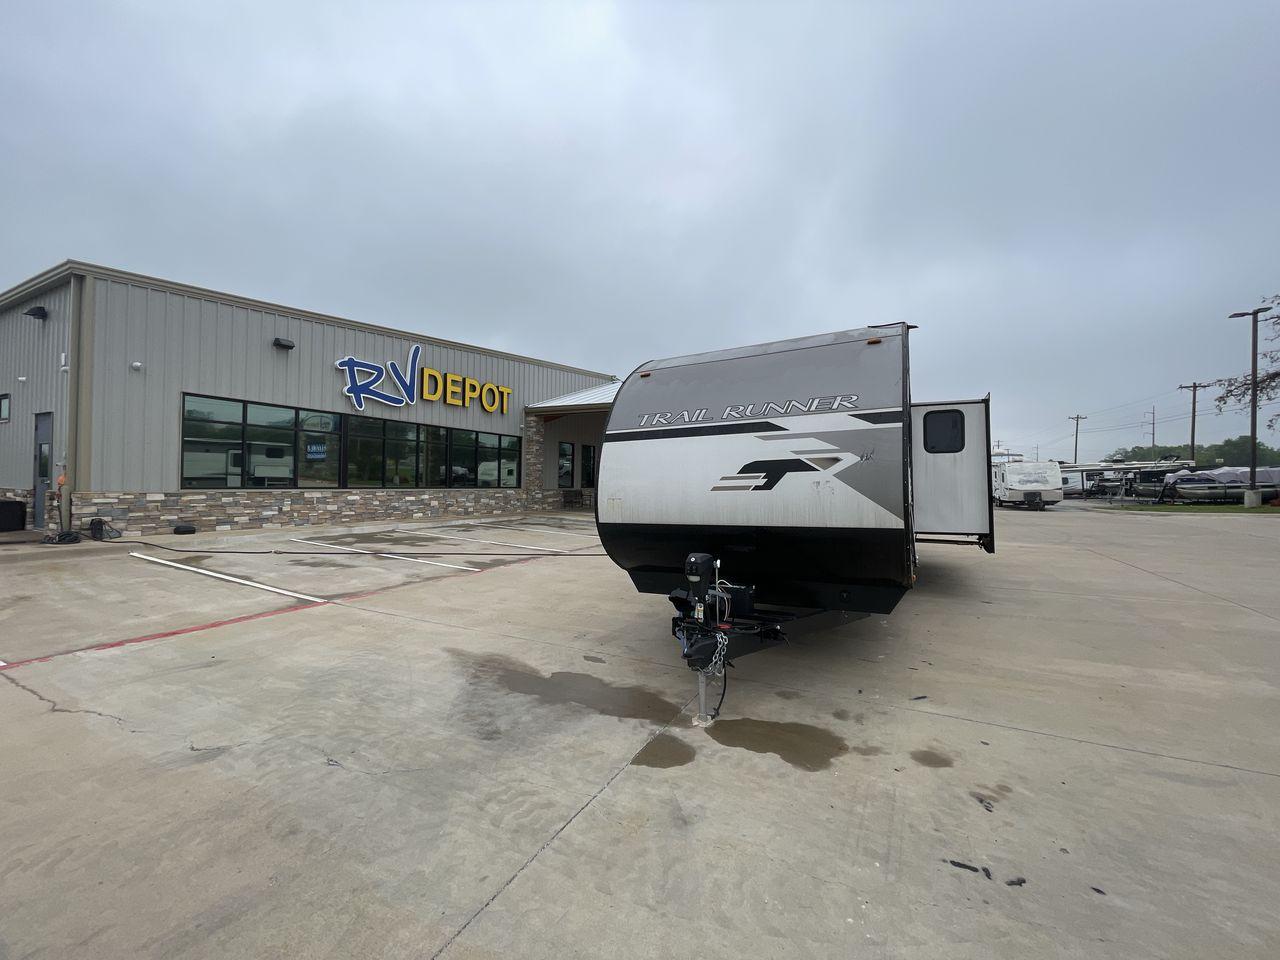 2022 HEARTLAND TRAIL RUNNER 31DB (5SFEB3724NE) , Length: 36.92 ft. | Dry Weight: 7,040 lbs. | Gross Weight: 9,642 lbs. | Slides: 1 transmission, located at 4319 N Main Street, Cleburne, TX, 76033, (817) 221-0660, 32.435829, -97.384178 - The 2022 Heartland Trail Runner 31DB is a flexible, family-friendly travel trailer that will make your camping trip more enjoyable. With a length of 36.92 feet and a dry weight of 7,040 pounds, this trailer gives you plenty of room and comfort for your trips. The gross weight of 9,642 pounds means t - Photo #0